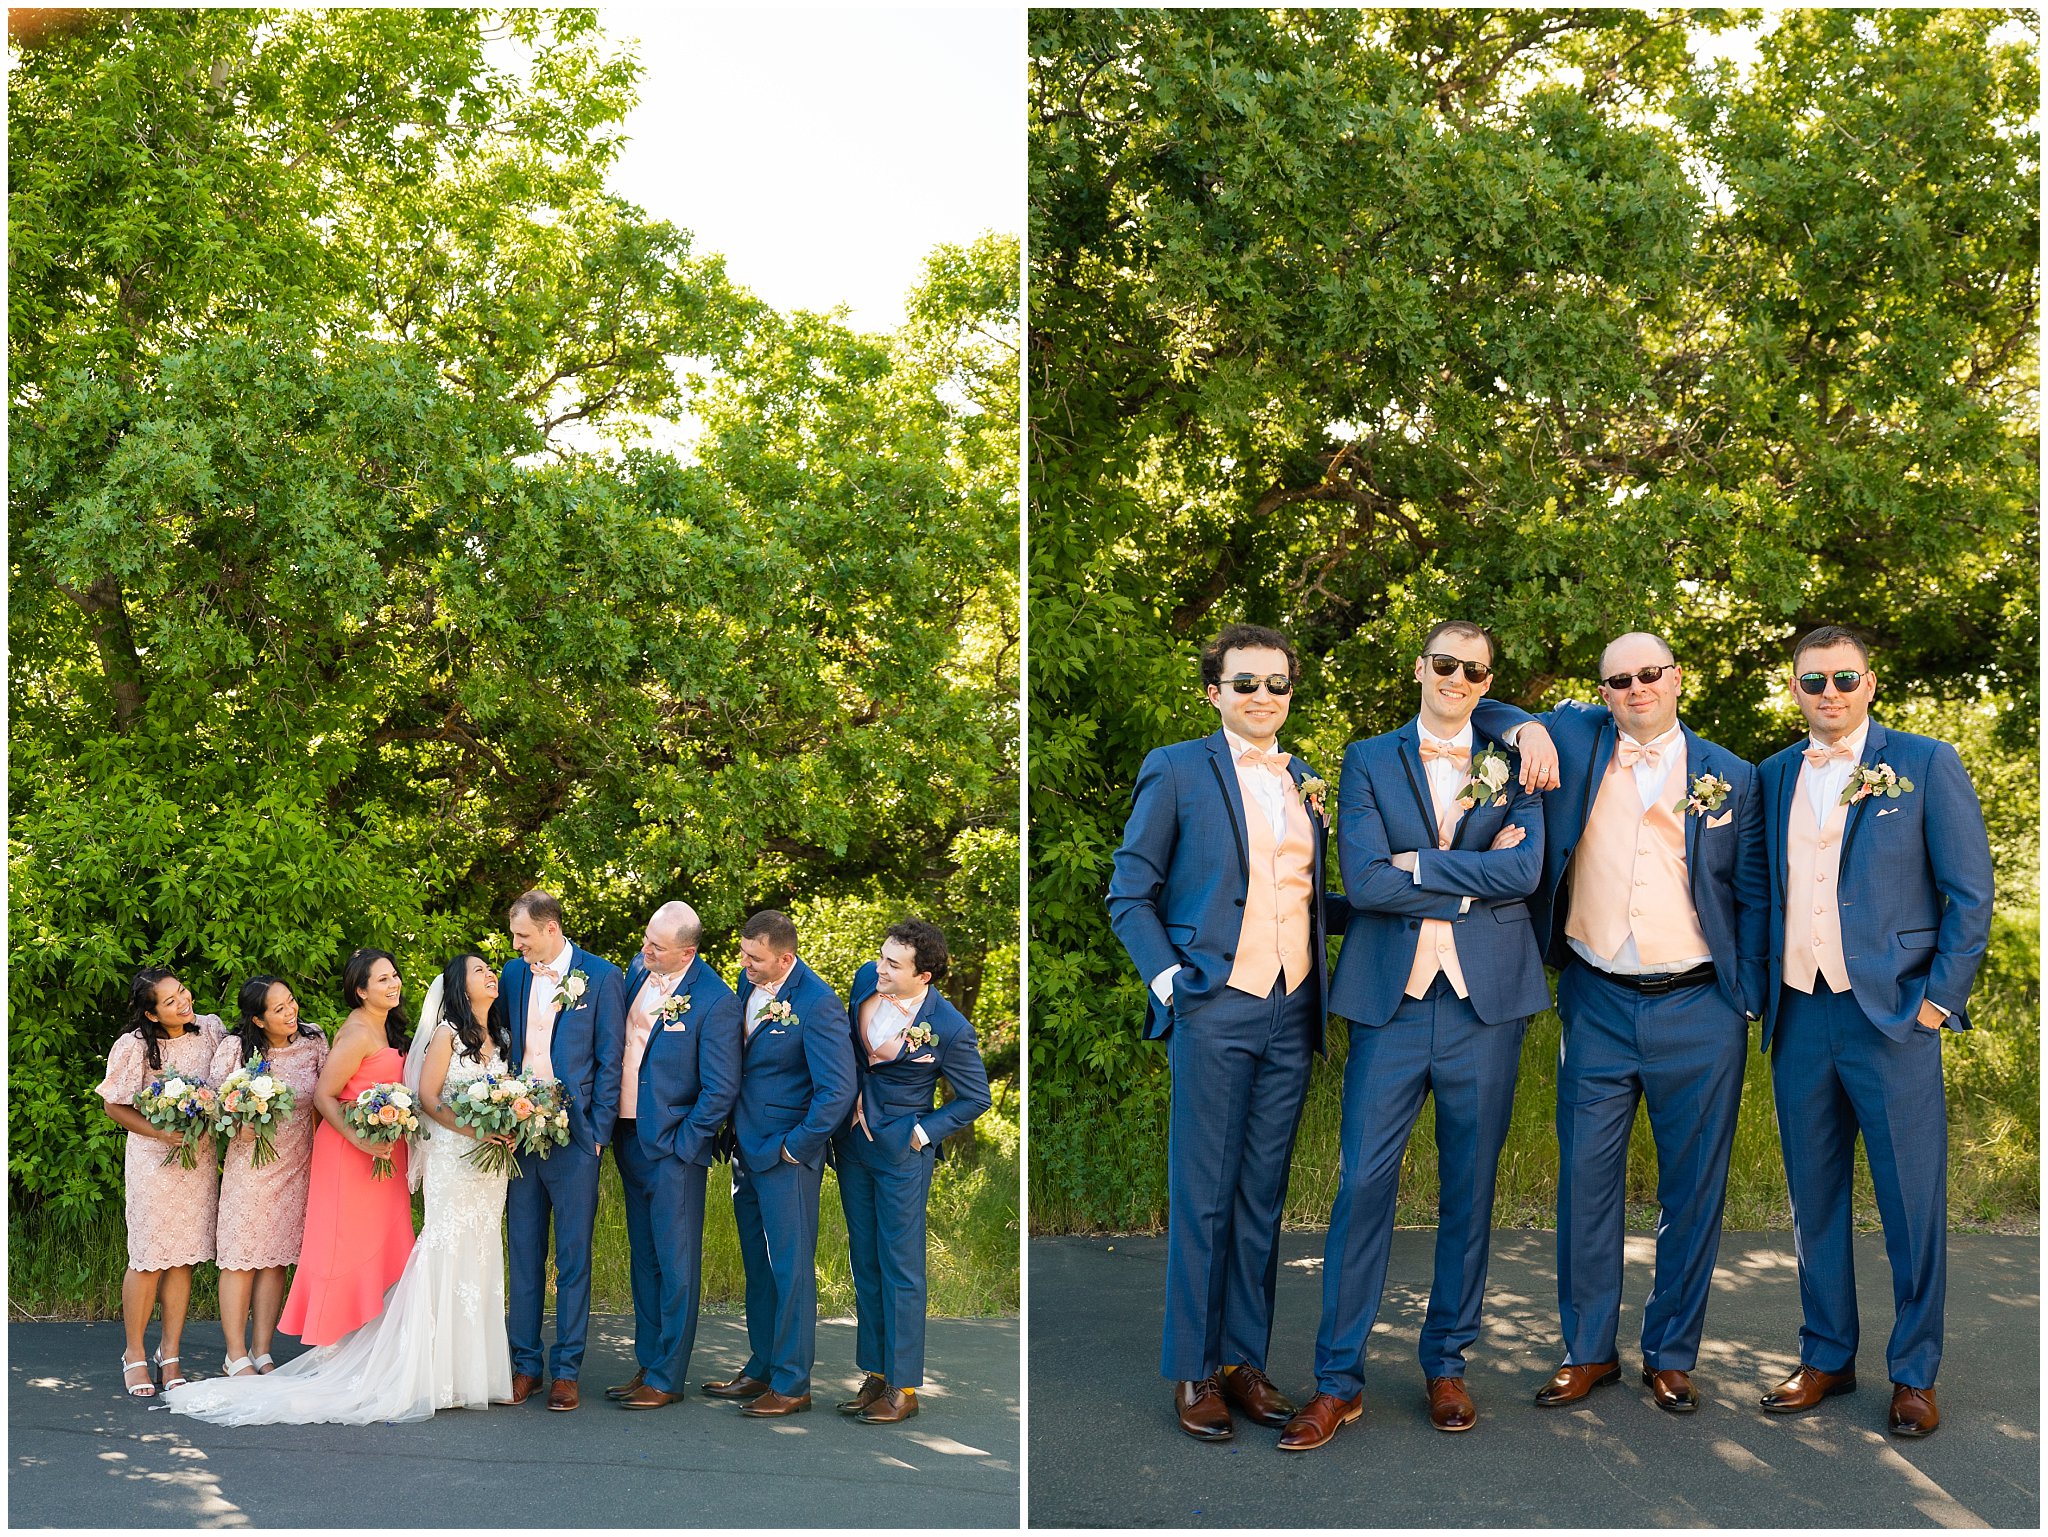 Wedding party of bridesmaids and groomsmen in blue, coral, and pink | Oak Hills Utah Destination Wedding | Jessie and Dallin Photography